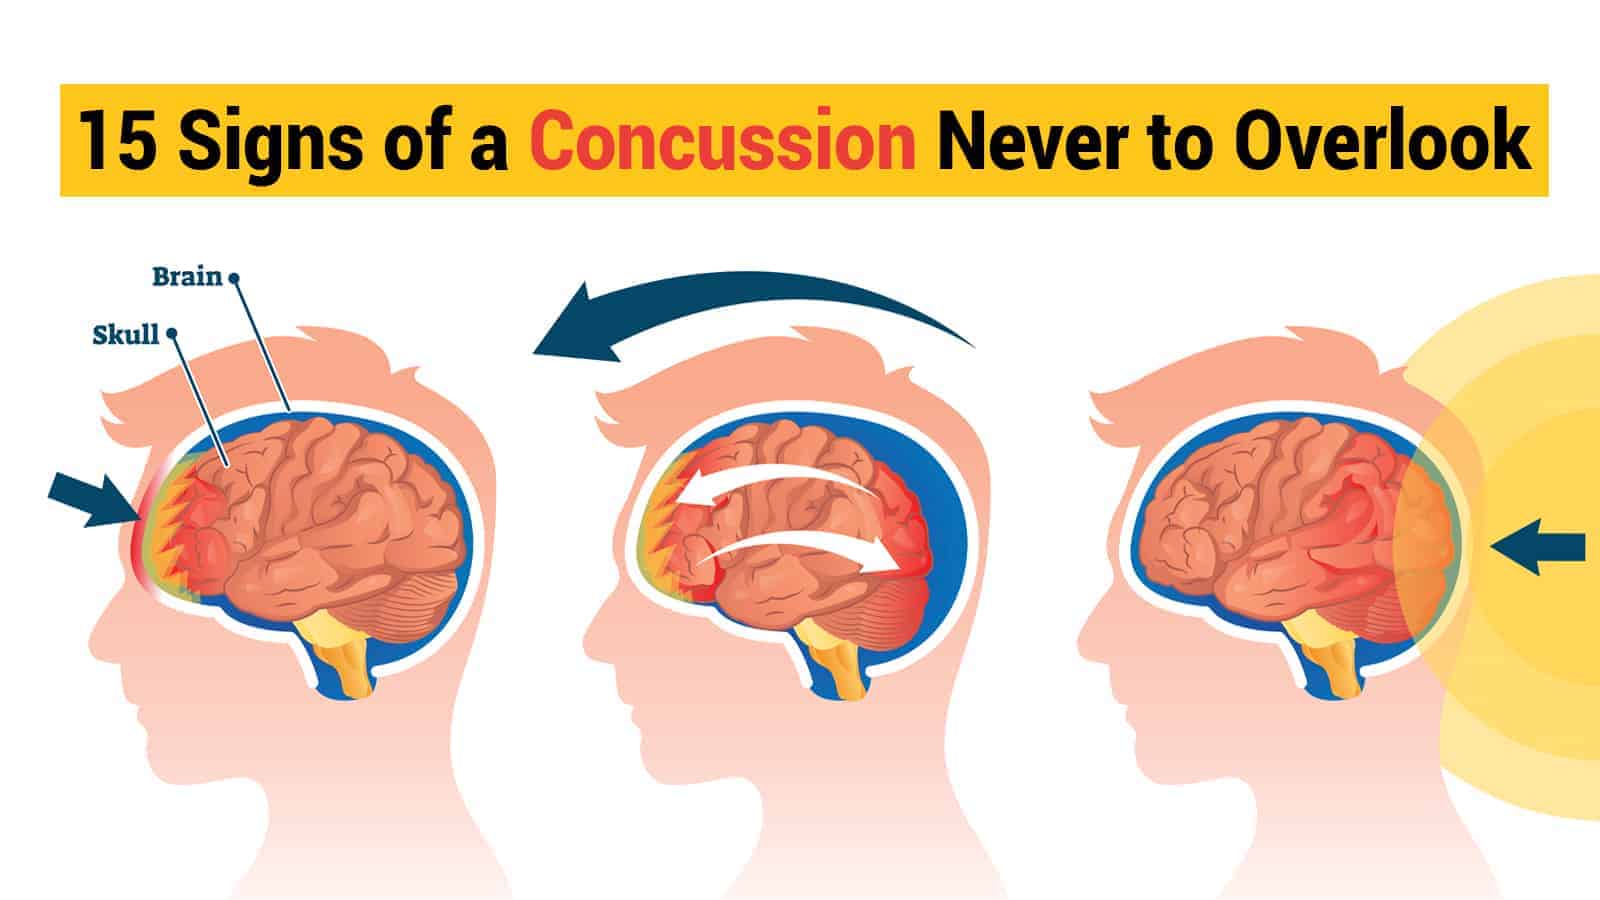 15 Signs of a Concussion Never to Overlook